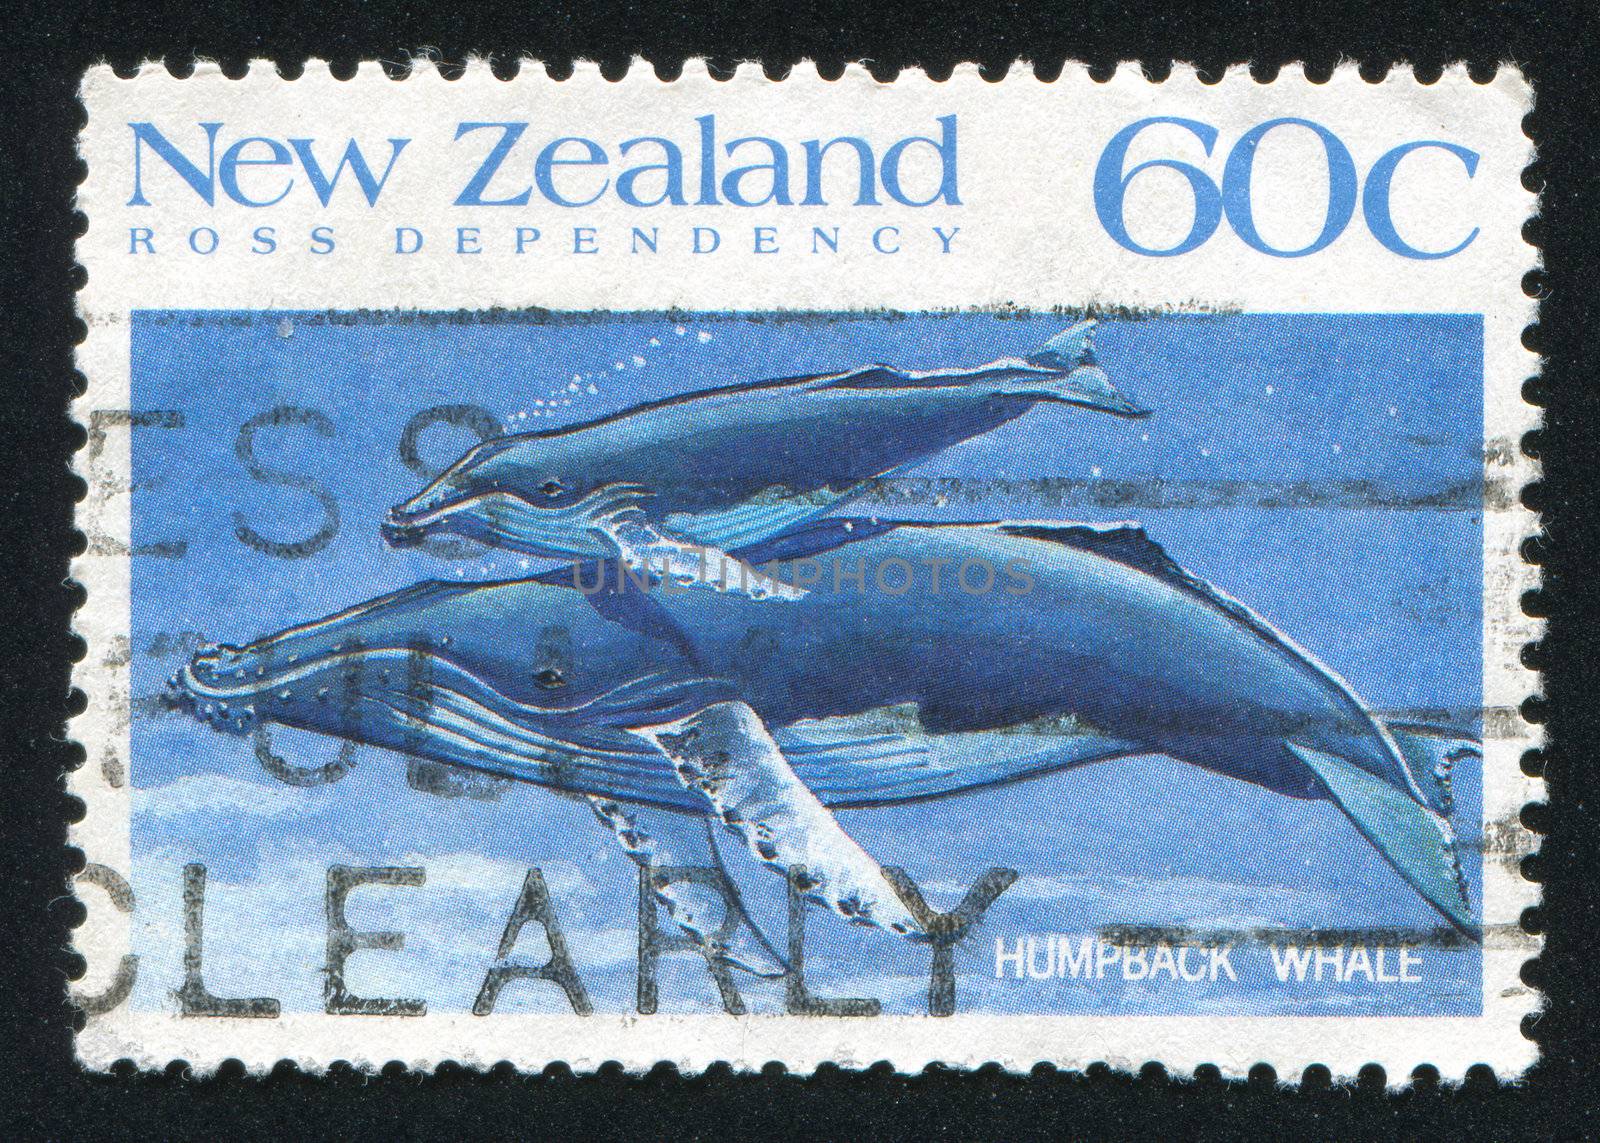 NEW ZEALAND — CIRCA 1988: stamp printed by New Zealand, shows whale Humpback, circa 1988